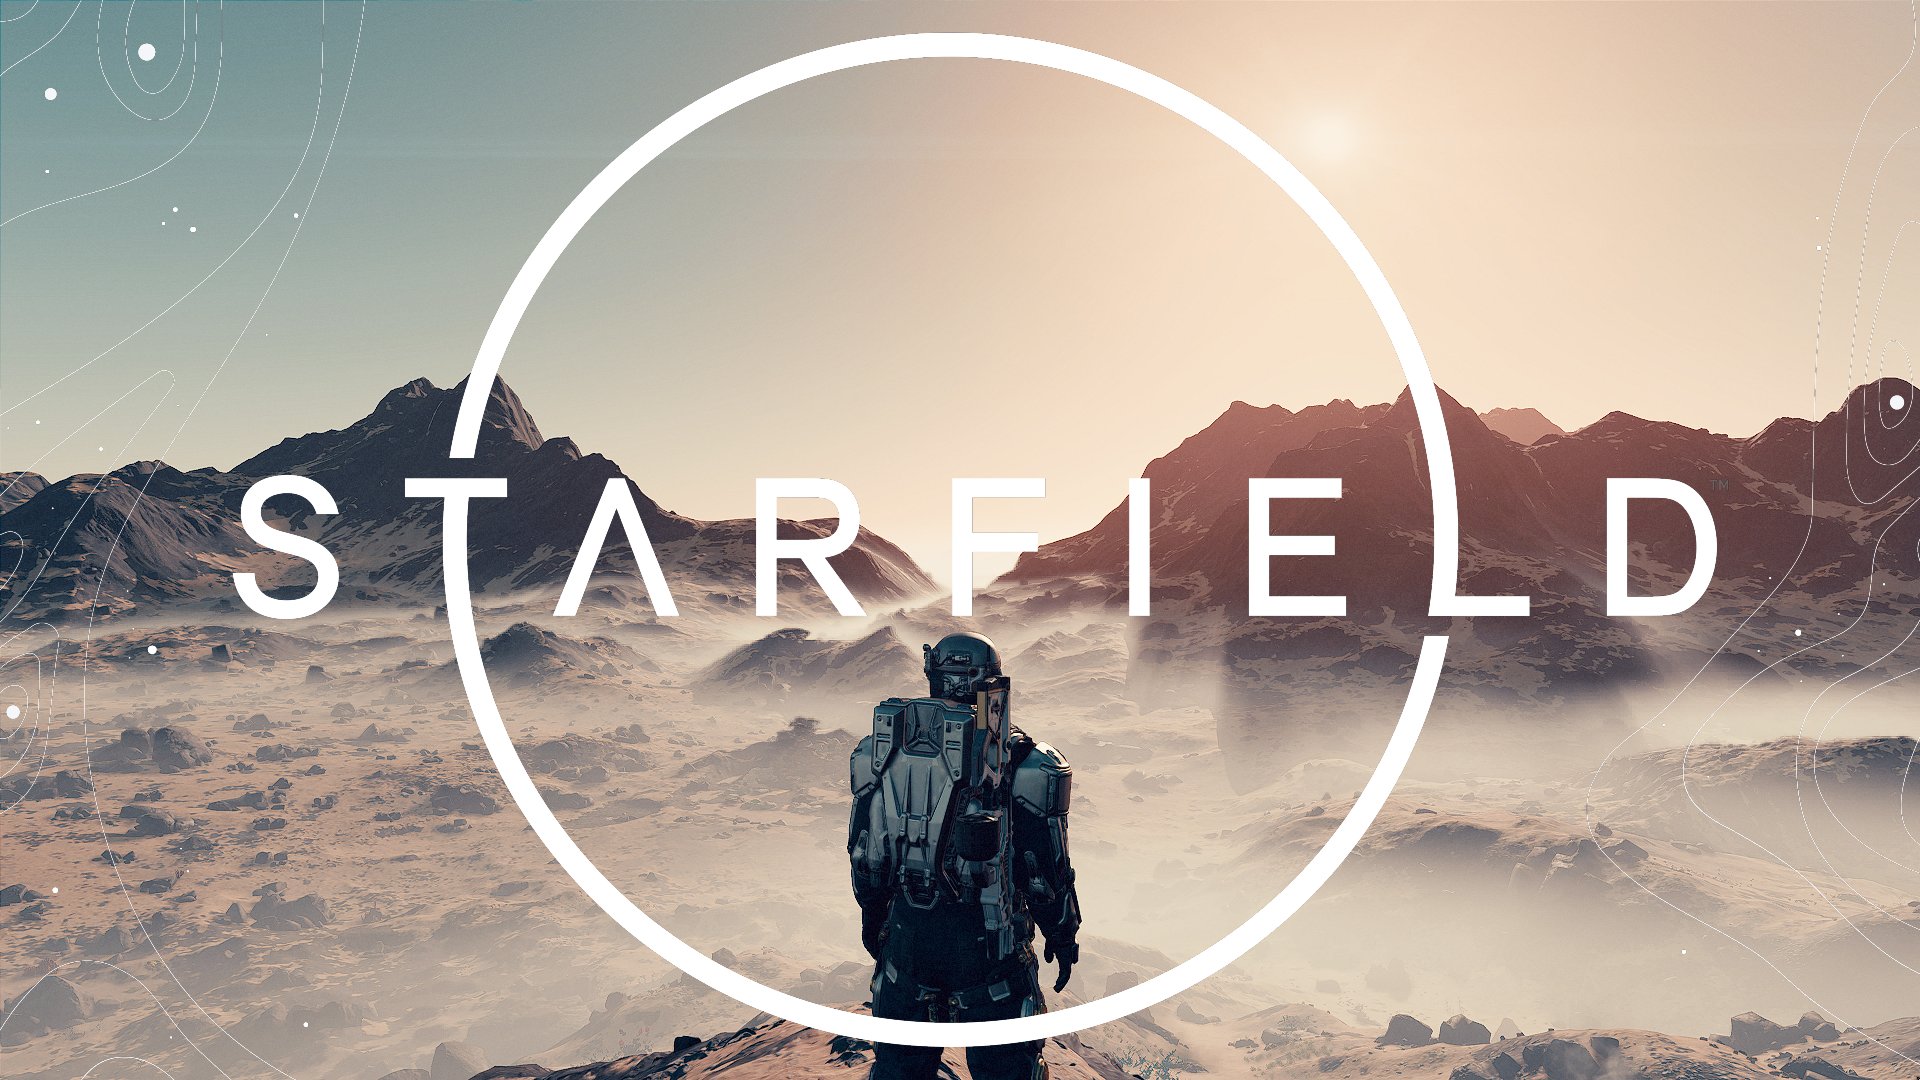 Starfield' PC Cheats: 9 Essential Console Commands to Take Over the Galaxy